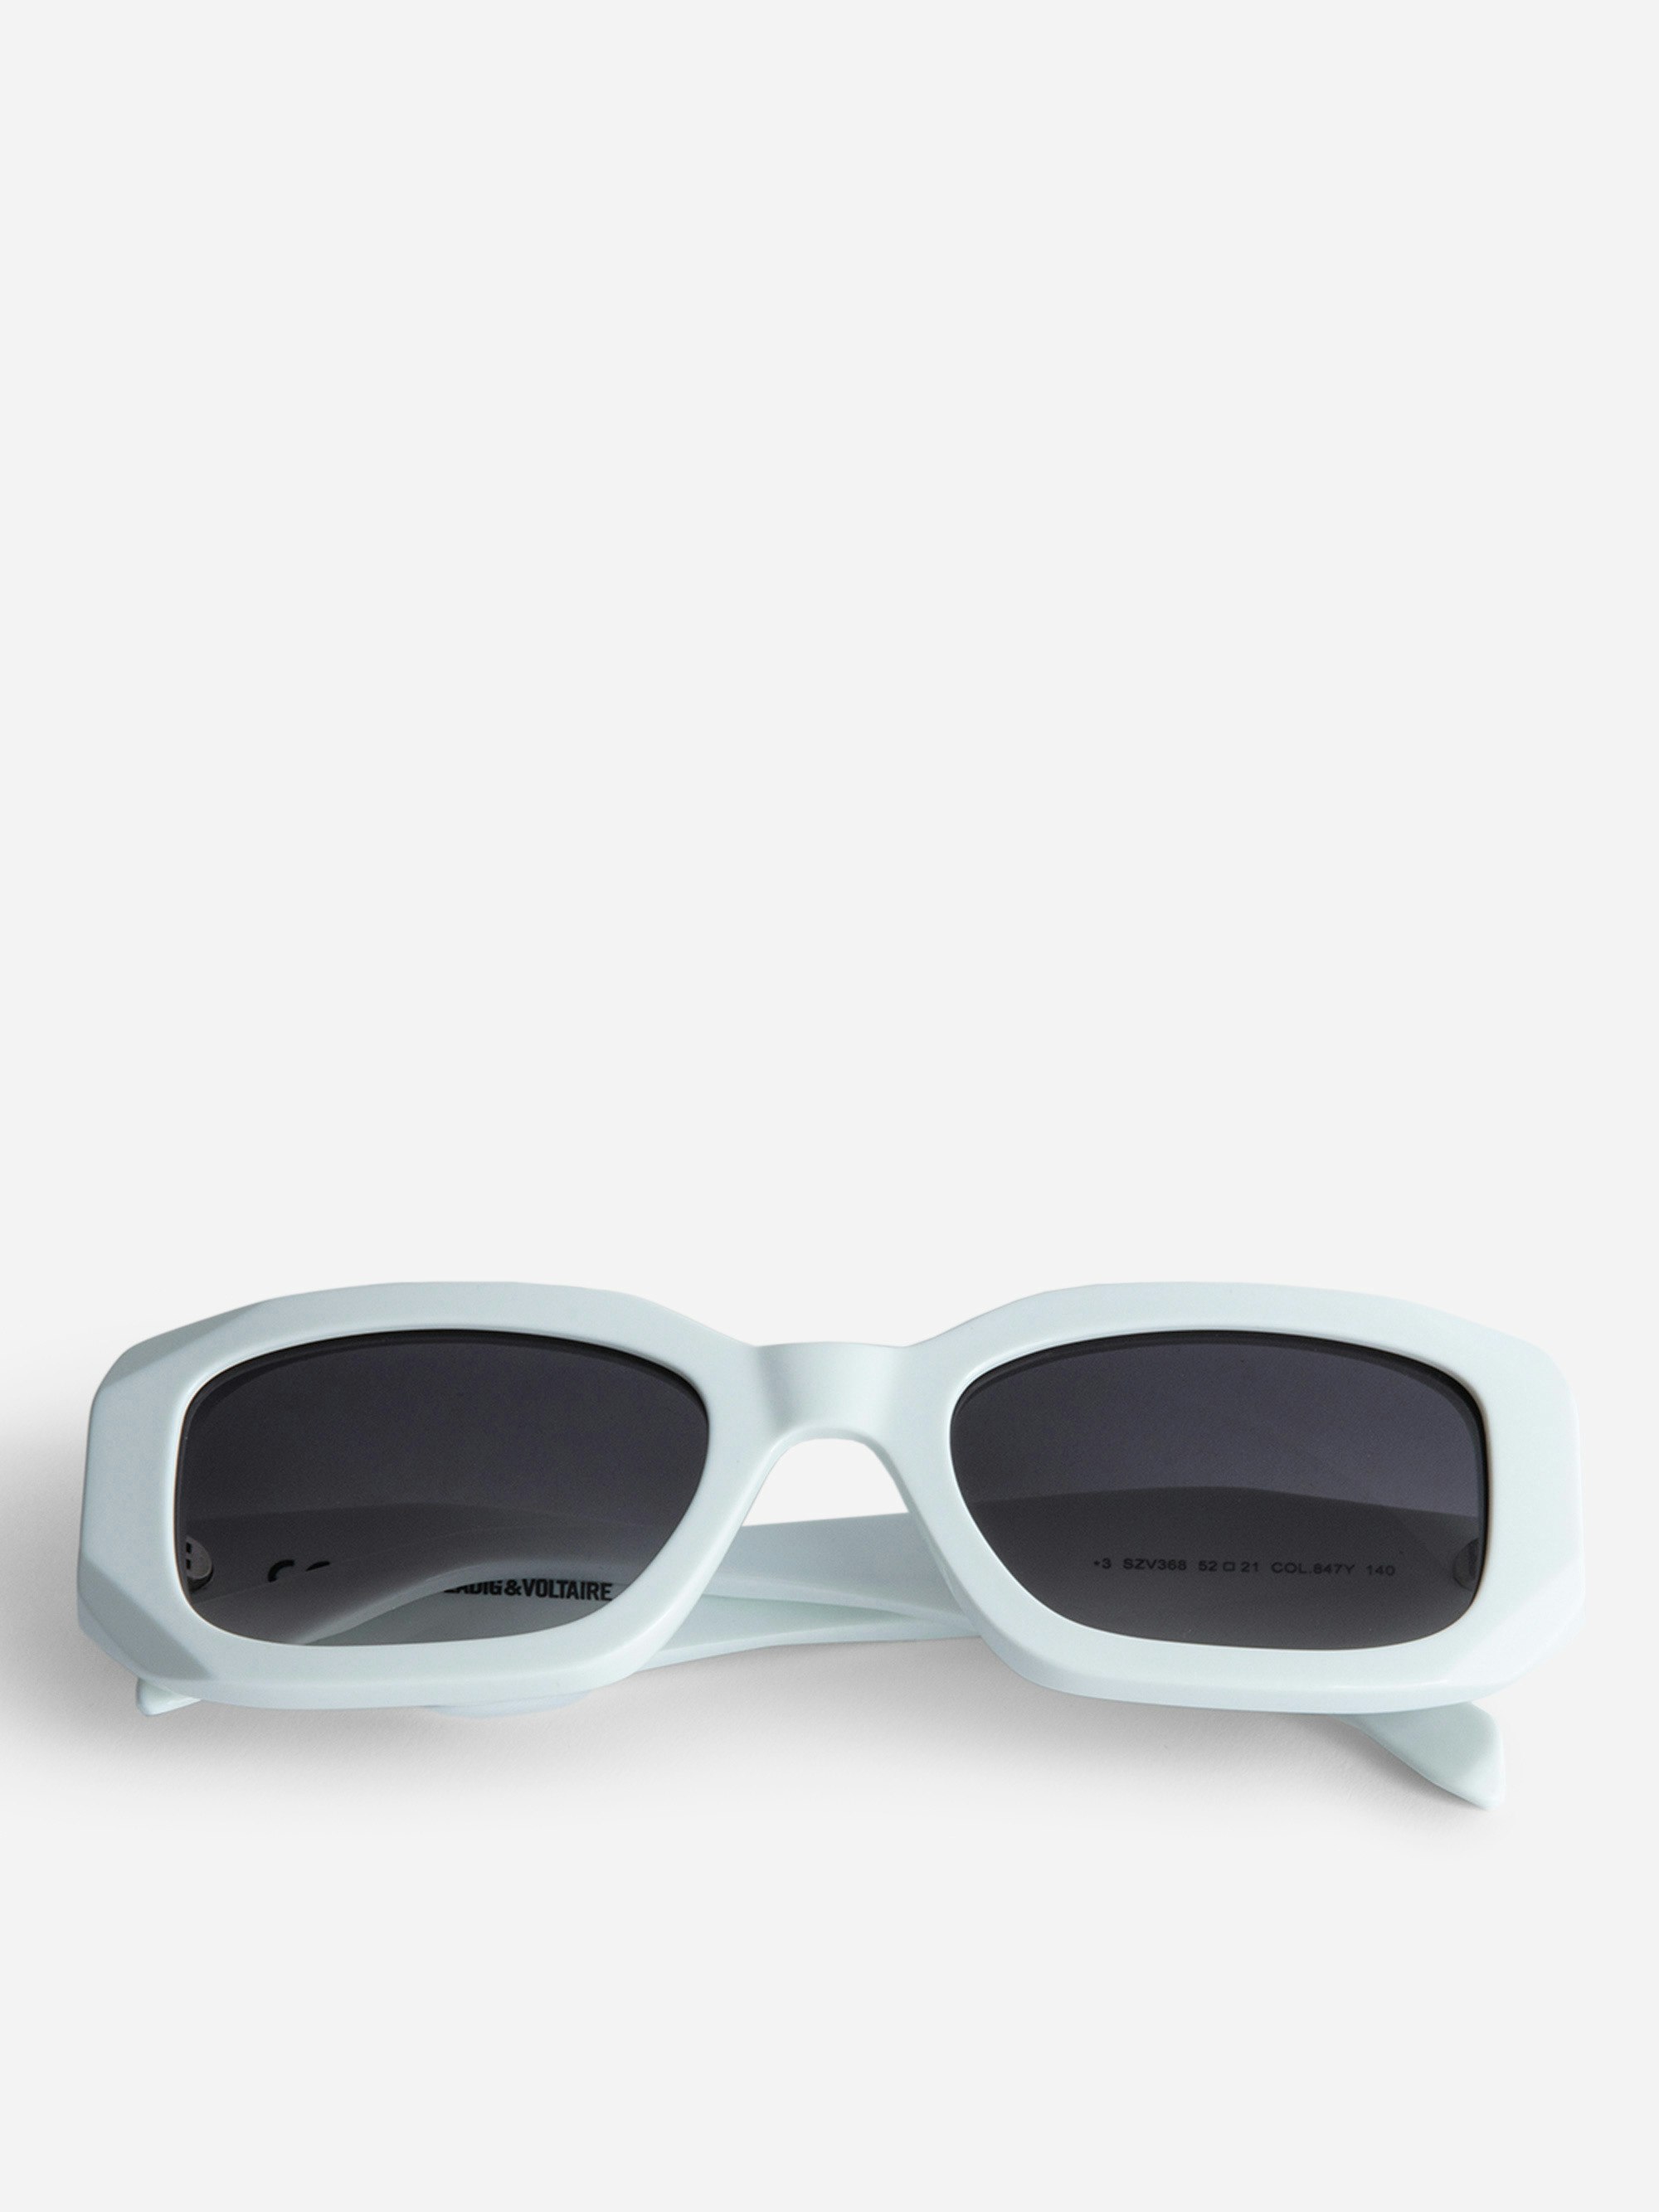 ZV23H3 Sunglasses - Unisex white rectangular sunglasses with wings on the unstructured temples.